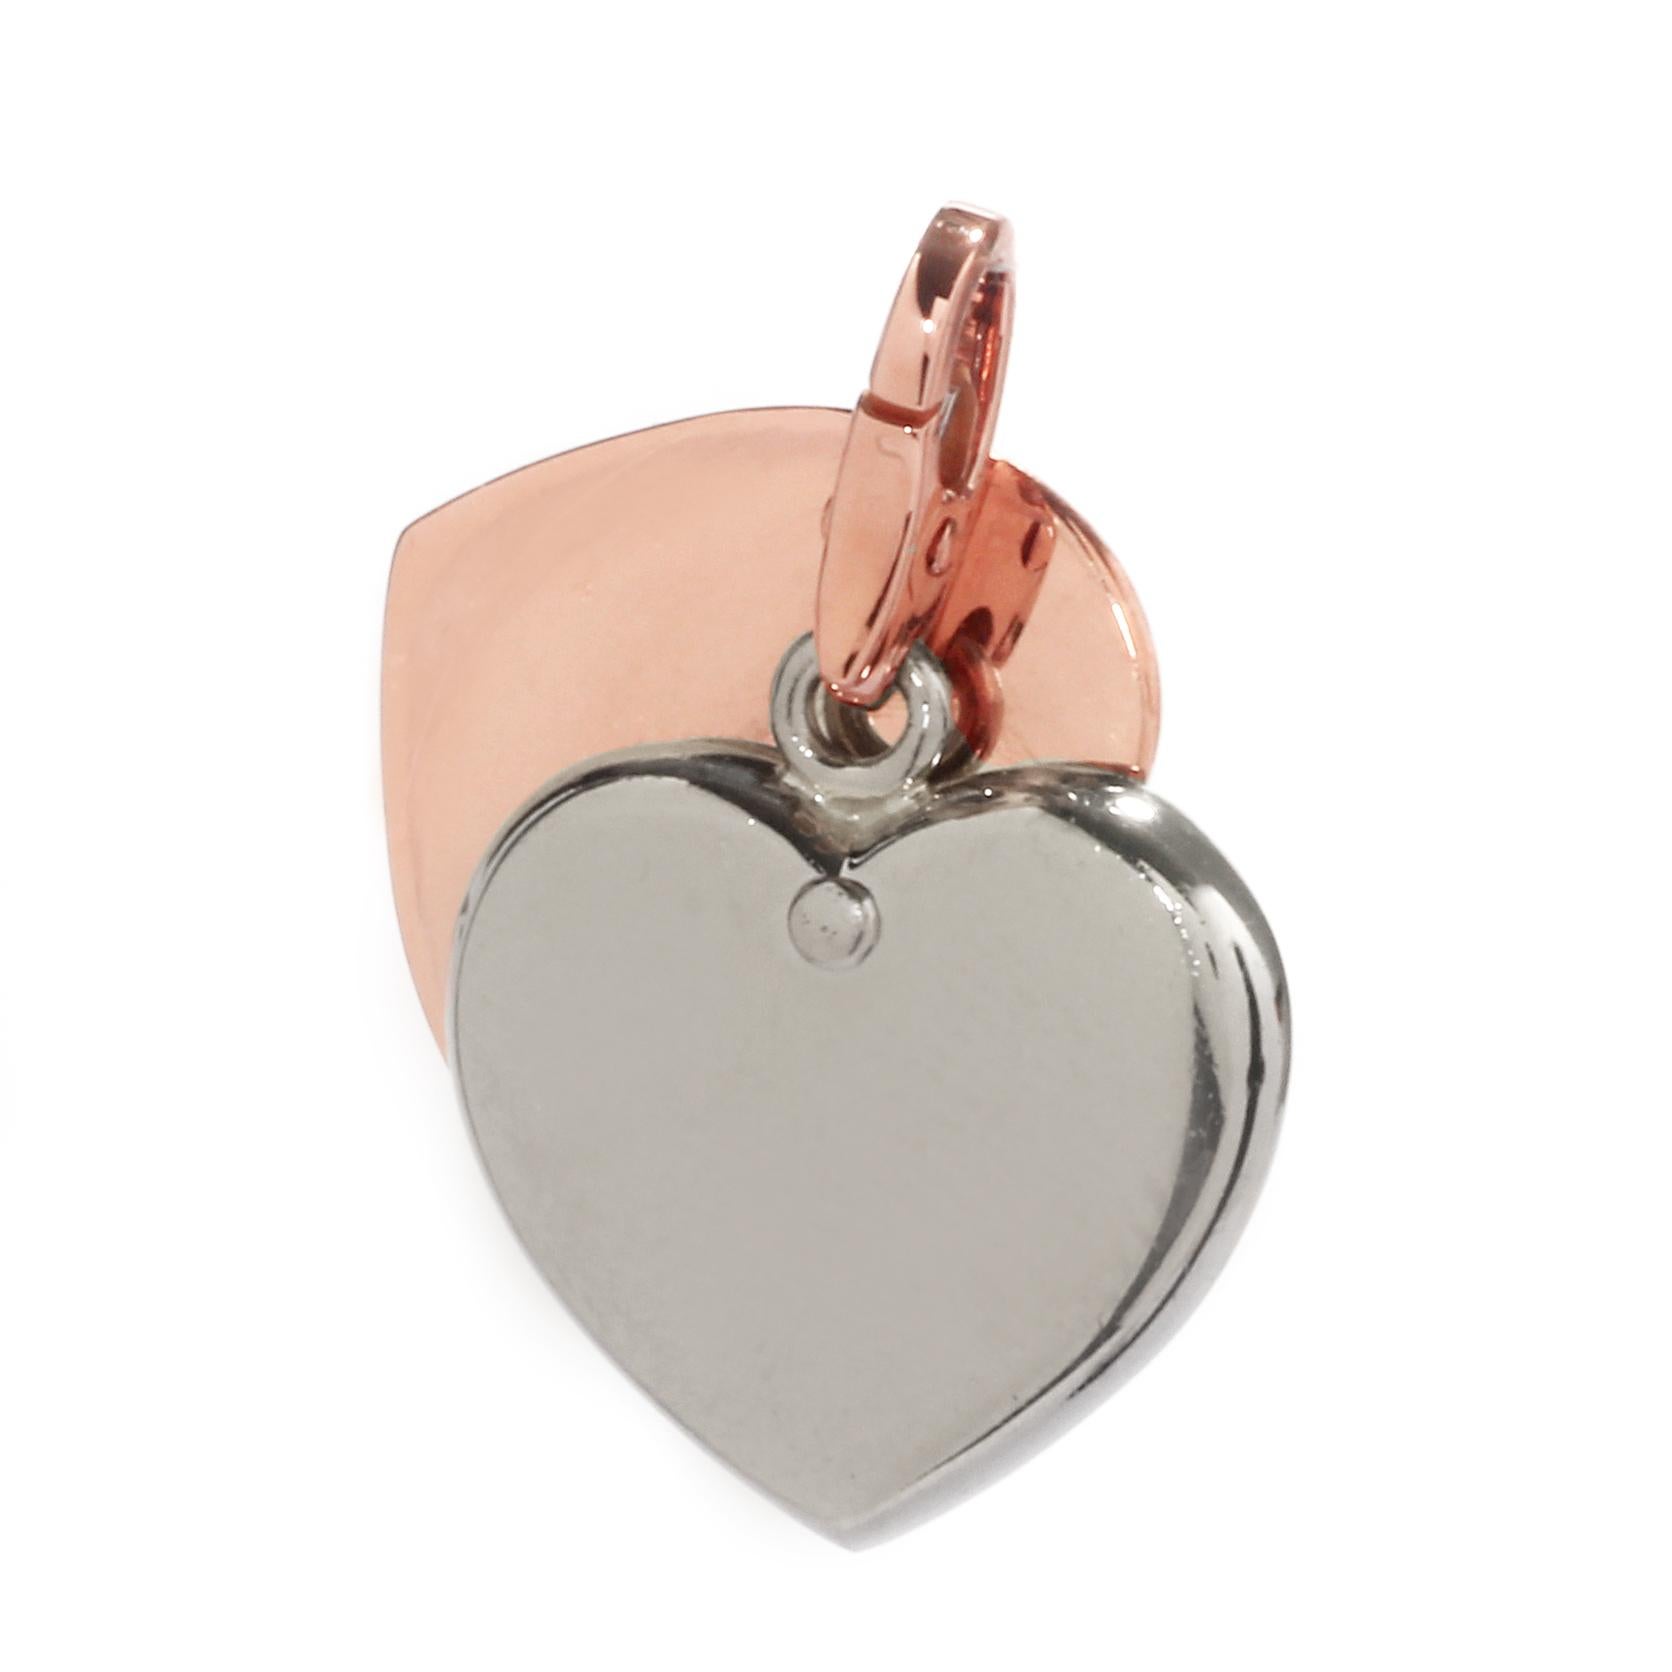 A lovely heart charm pendant by Cartier featuring 18k white and rose gold, forming a perfect colorful combination.

Hallmarks: Cartier, 750, Unique Serial Number
Weight: 14.4 Grams
Dimensions: .74″ Inches wide by 1.14″ Inches in length

Inventory